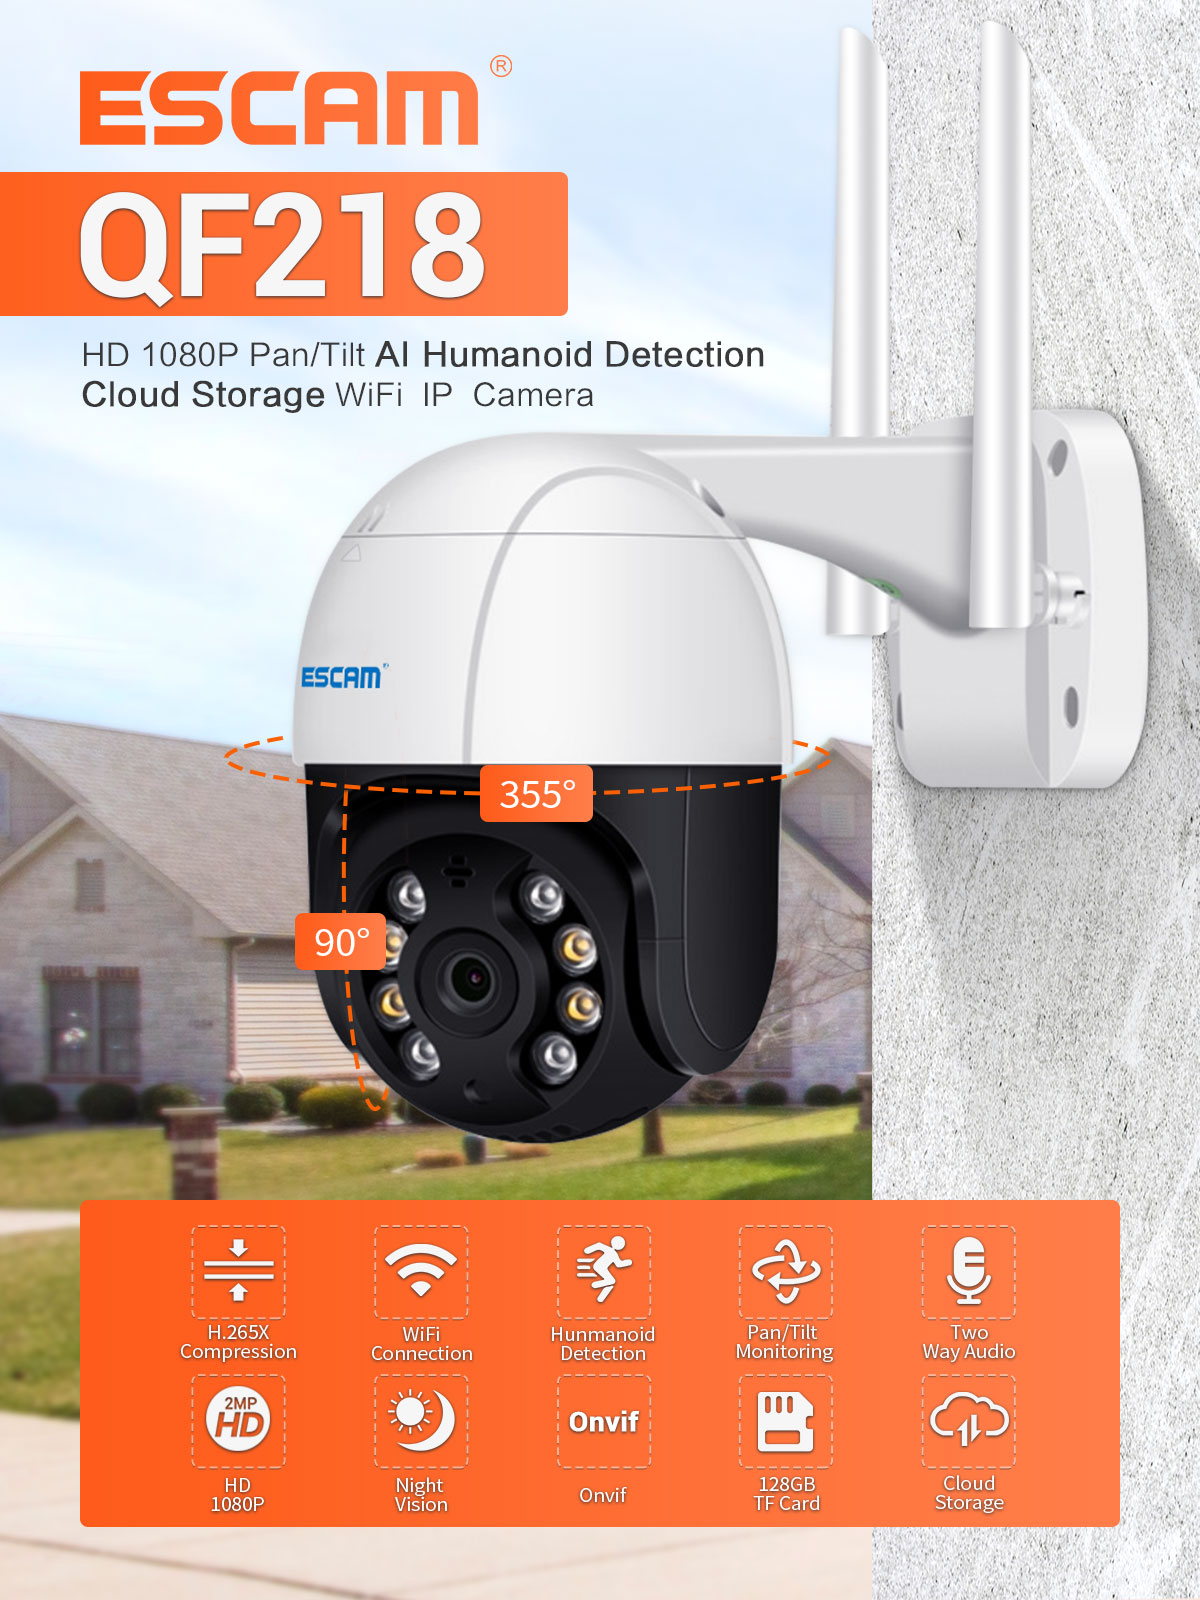 ESCAM-QF218-1080P-PanTilt-AI-Humanoid-detection-Cloud-Storage-Waterproof-WiFi-IP-Camera-with-Two-Way-1693317-1